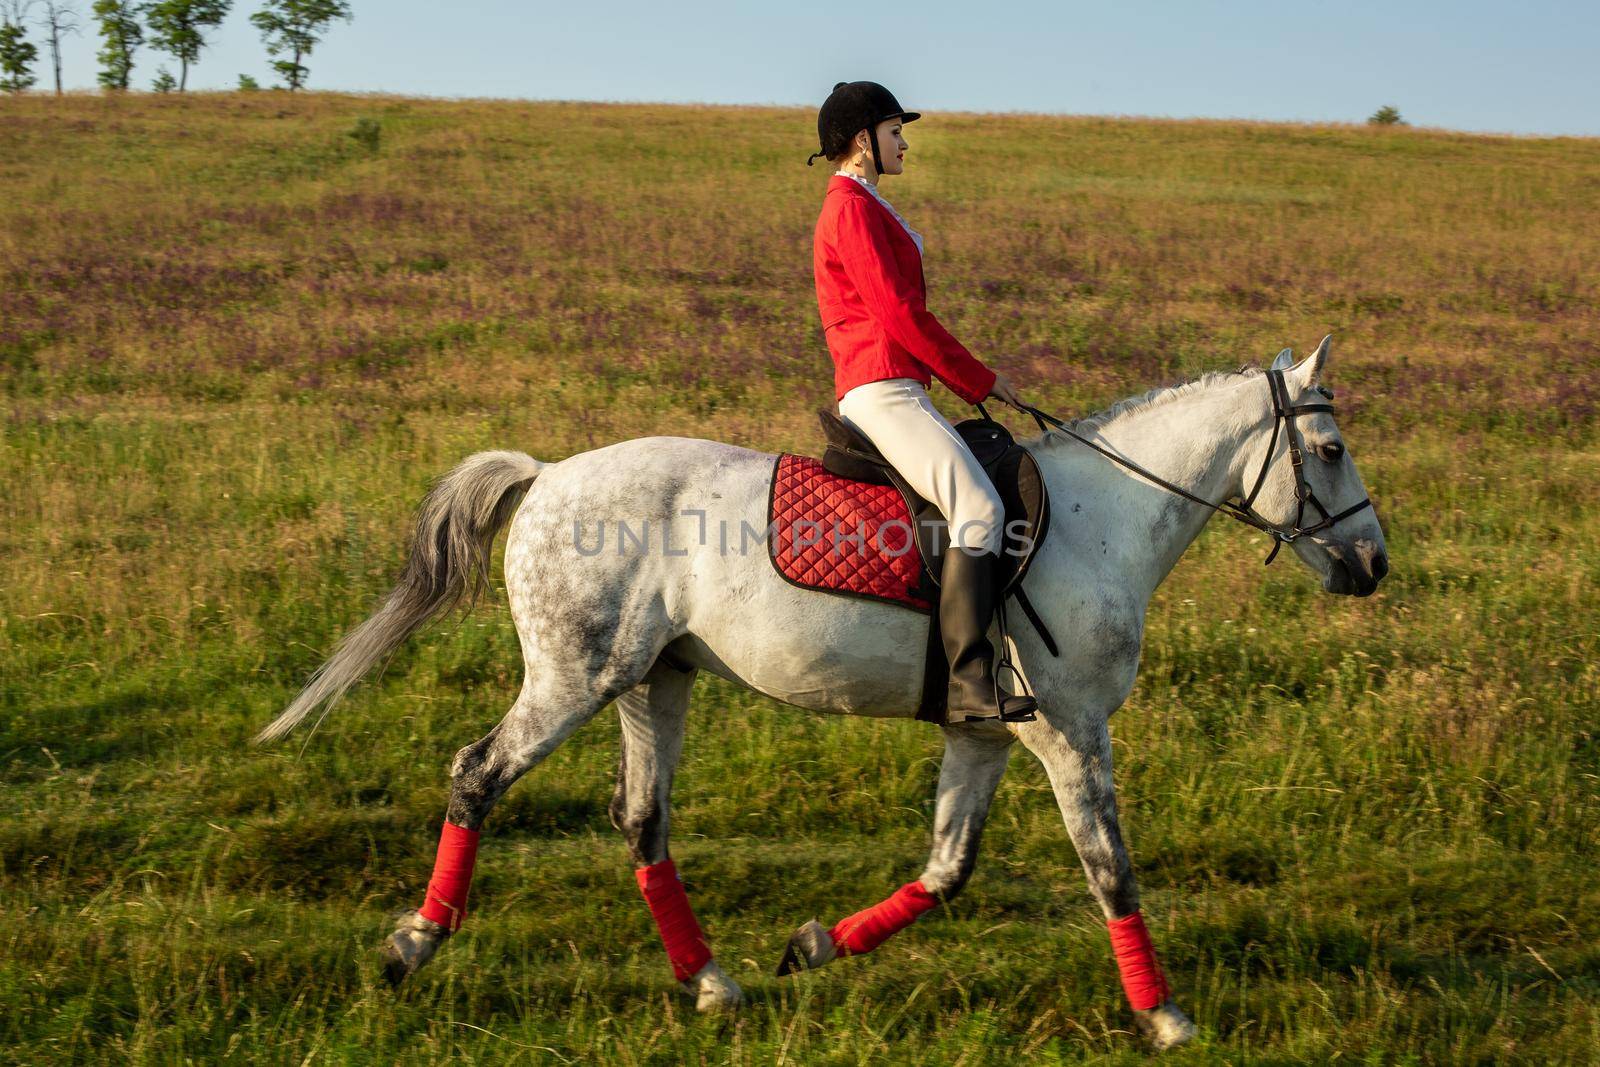 The sportswoman on a horse. The horsewoman on a red horse. Equestrianism. Horse riding. racing. Rider on a horse.